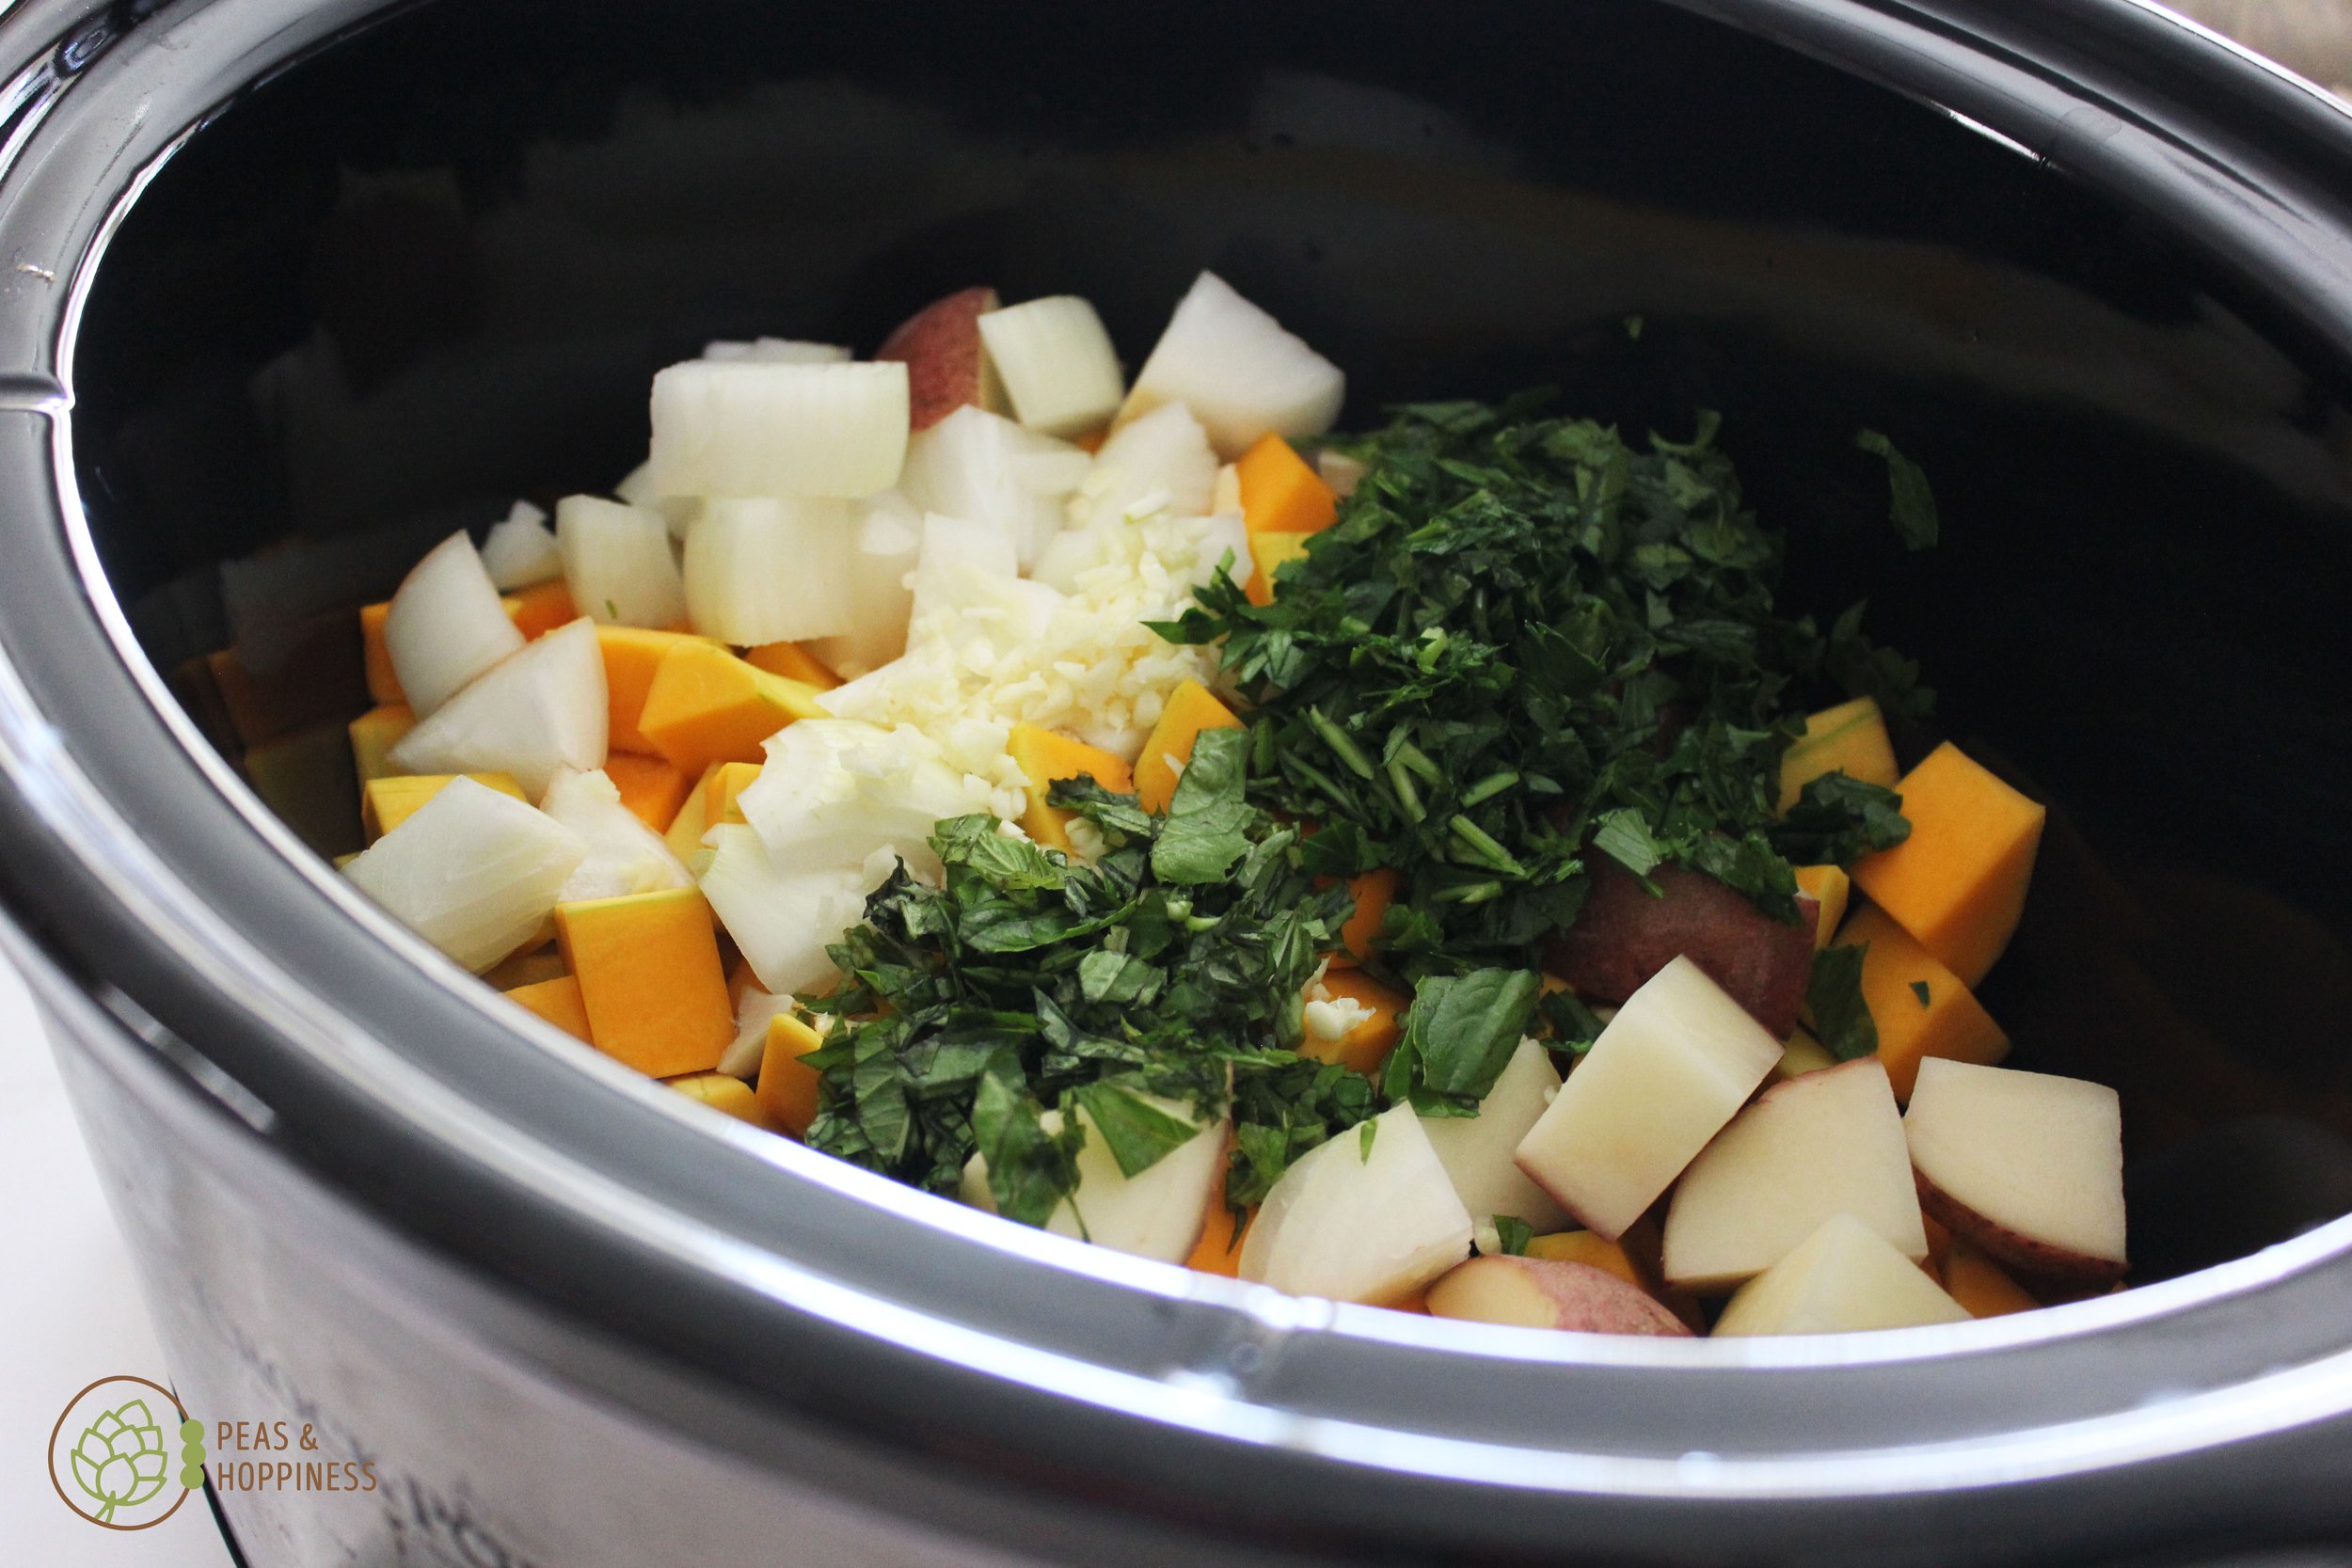 Slow-cooker filled with cubed potato, butternut squash, diced onion, minced garlic, and chopped herbs